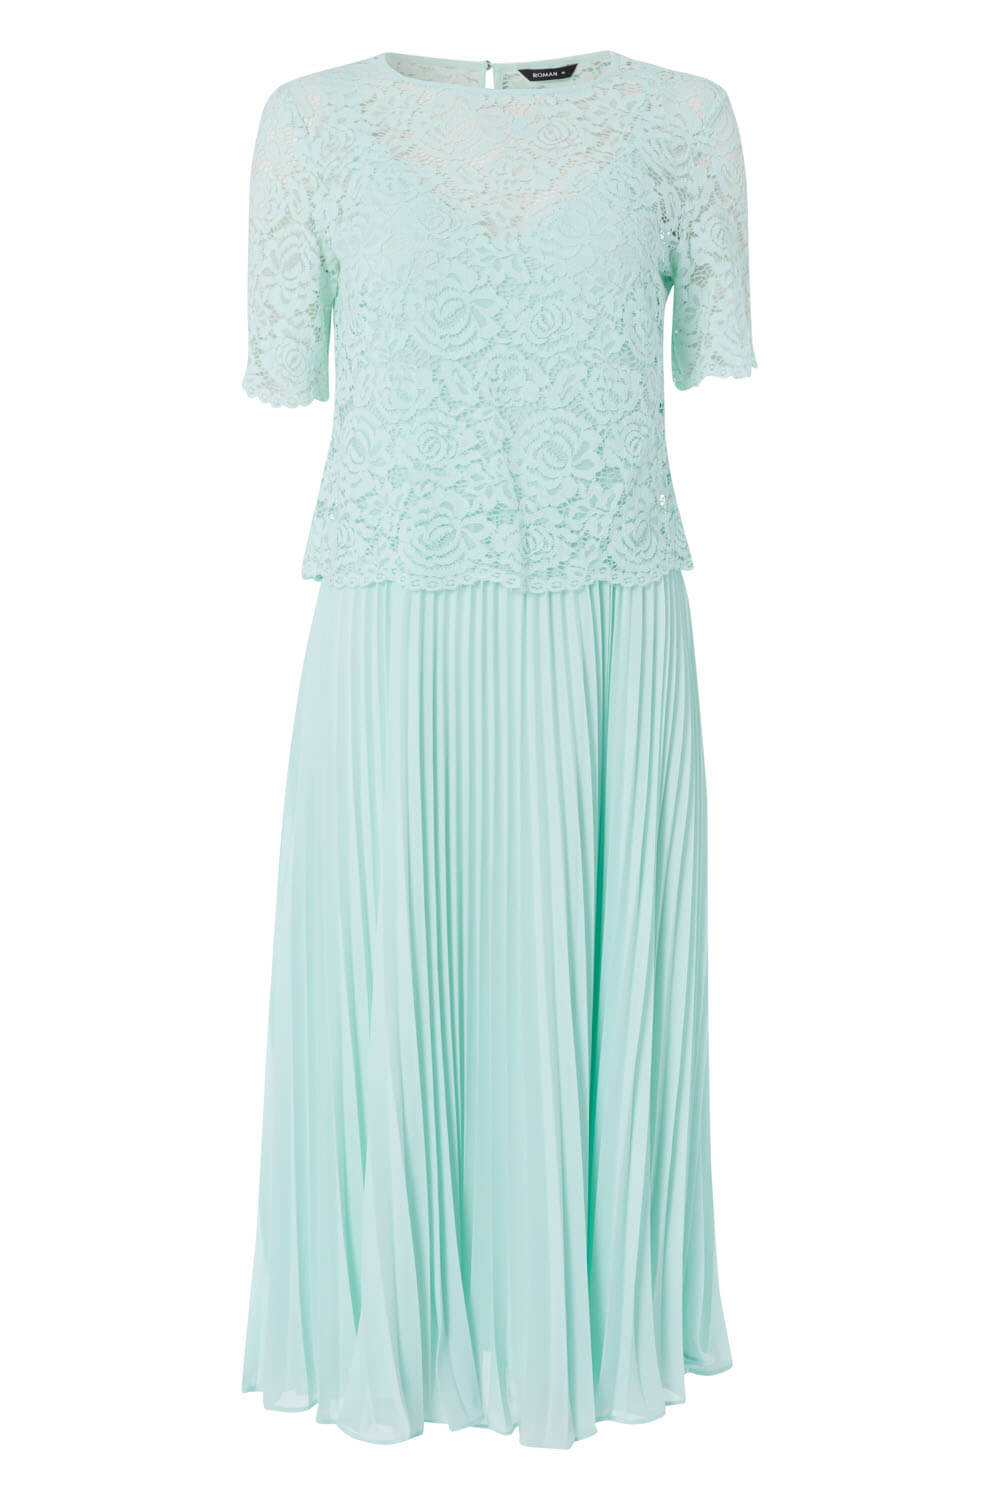 Mint Lace Top Overlay Pleated Midi Dress, Image 5 of 5